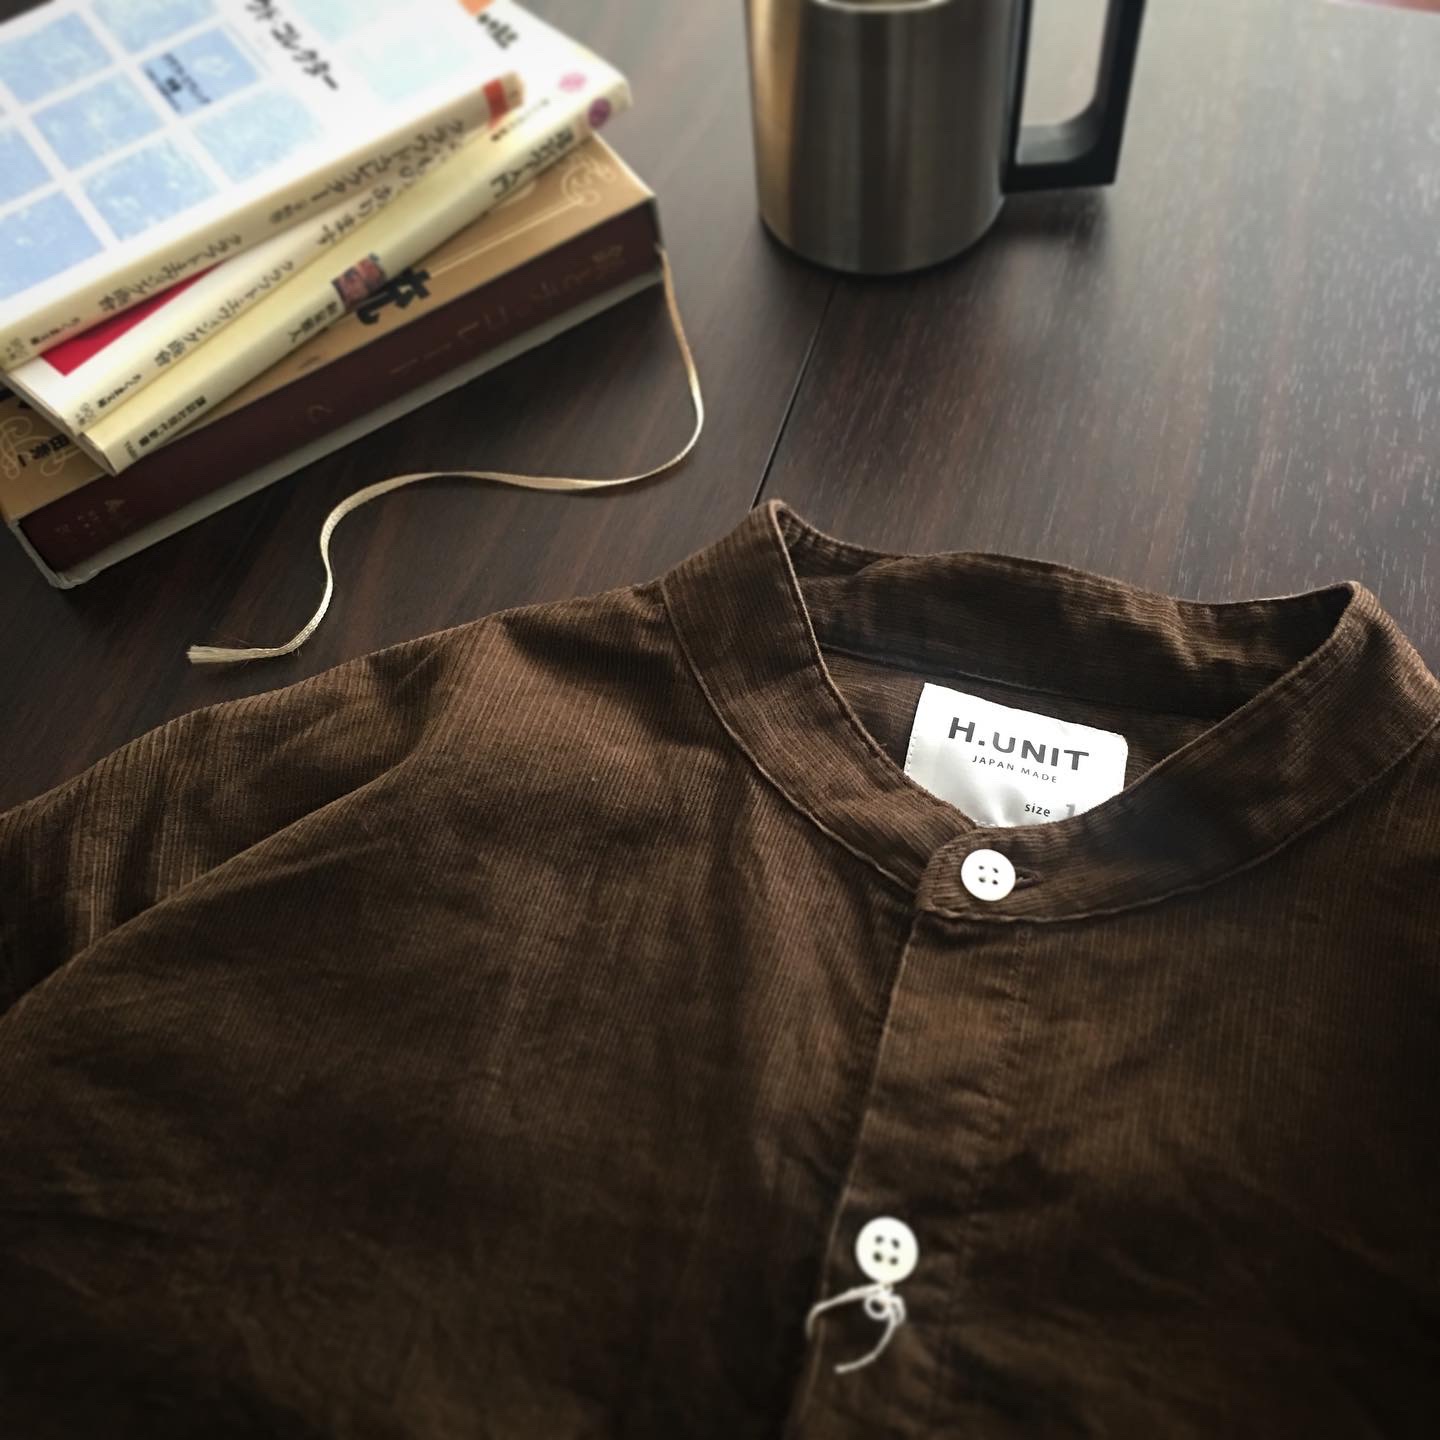 Read more about the article H.UNIT Corduroy shirt / アンティークな雰囲気が最高です。